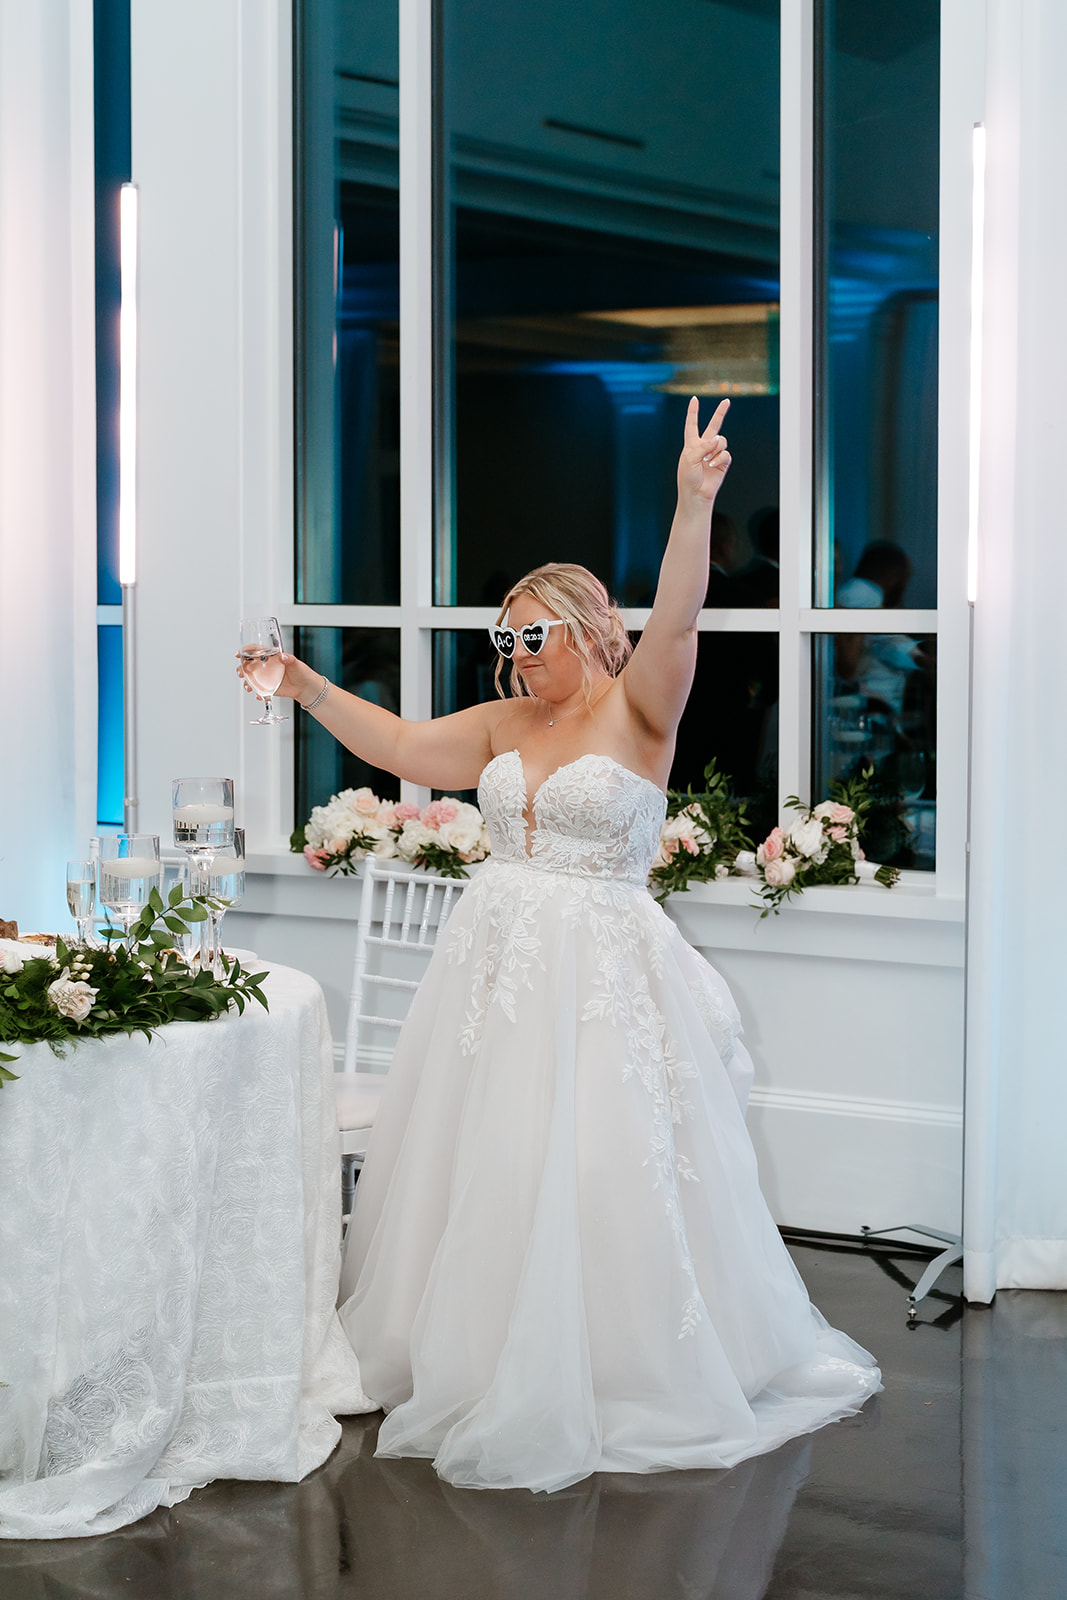 A bride in a white gown with a glass in hand, raising her other hand in a celebratory gesture at a wedding reception.